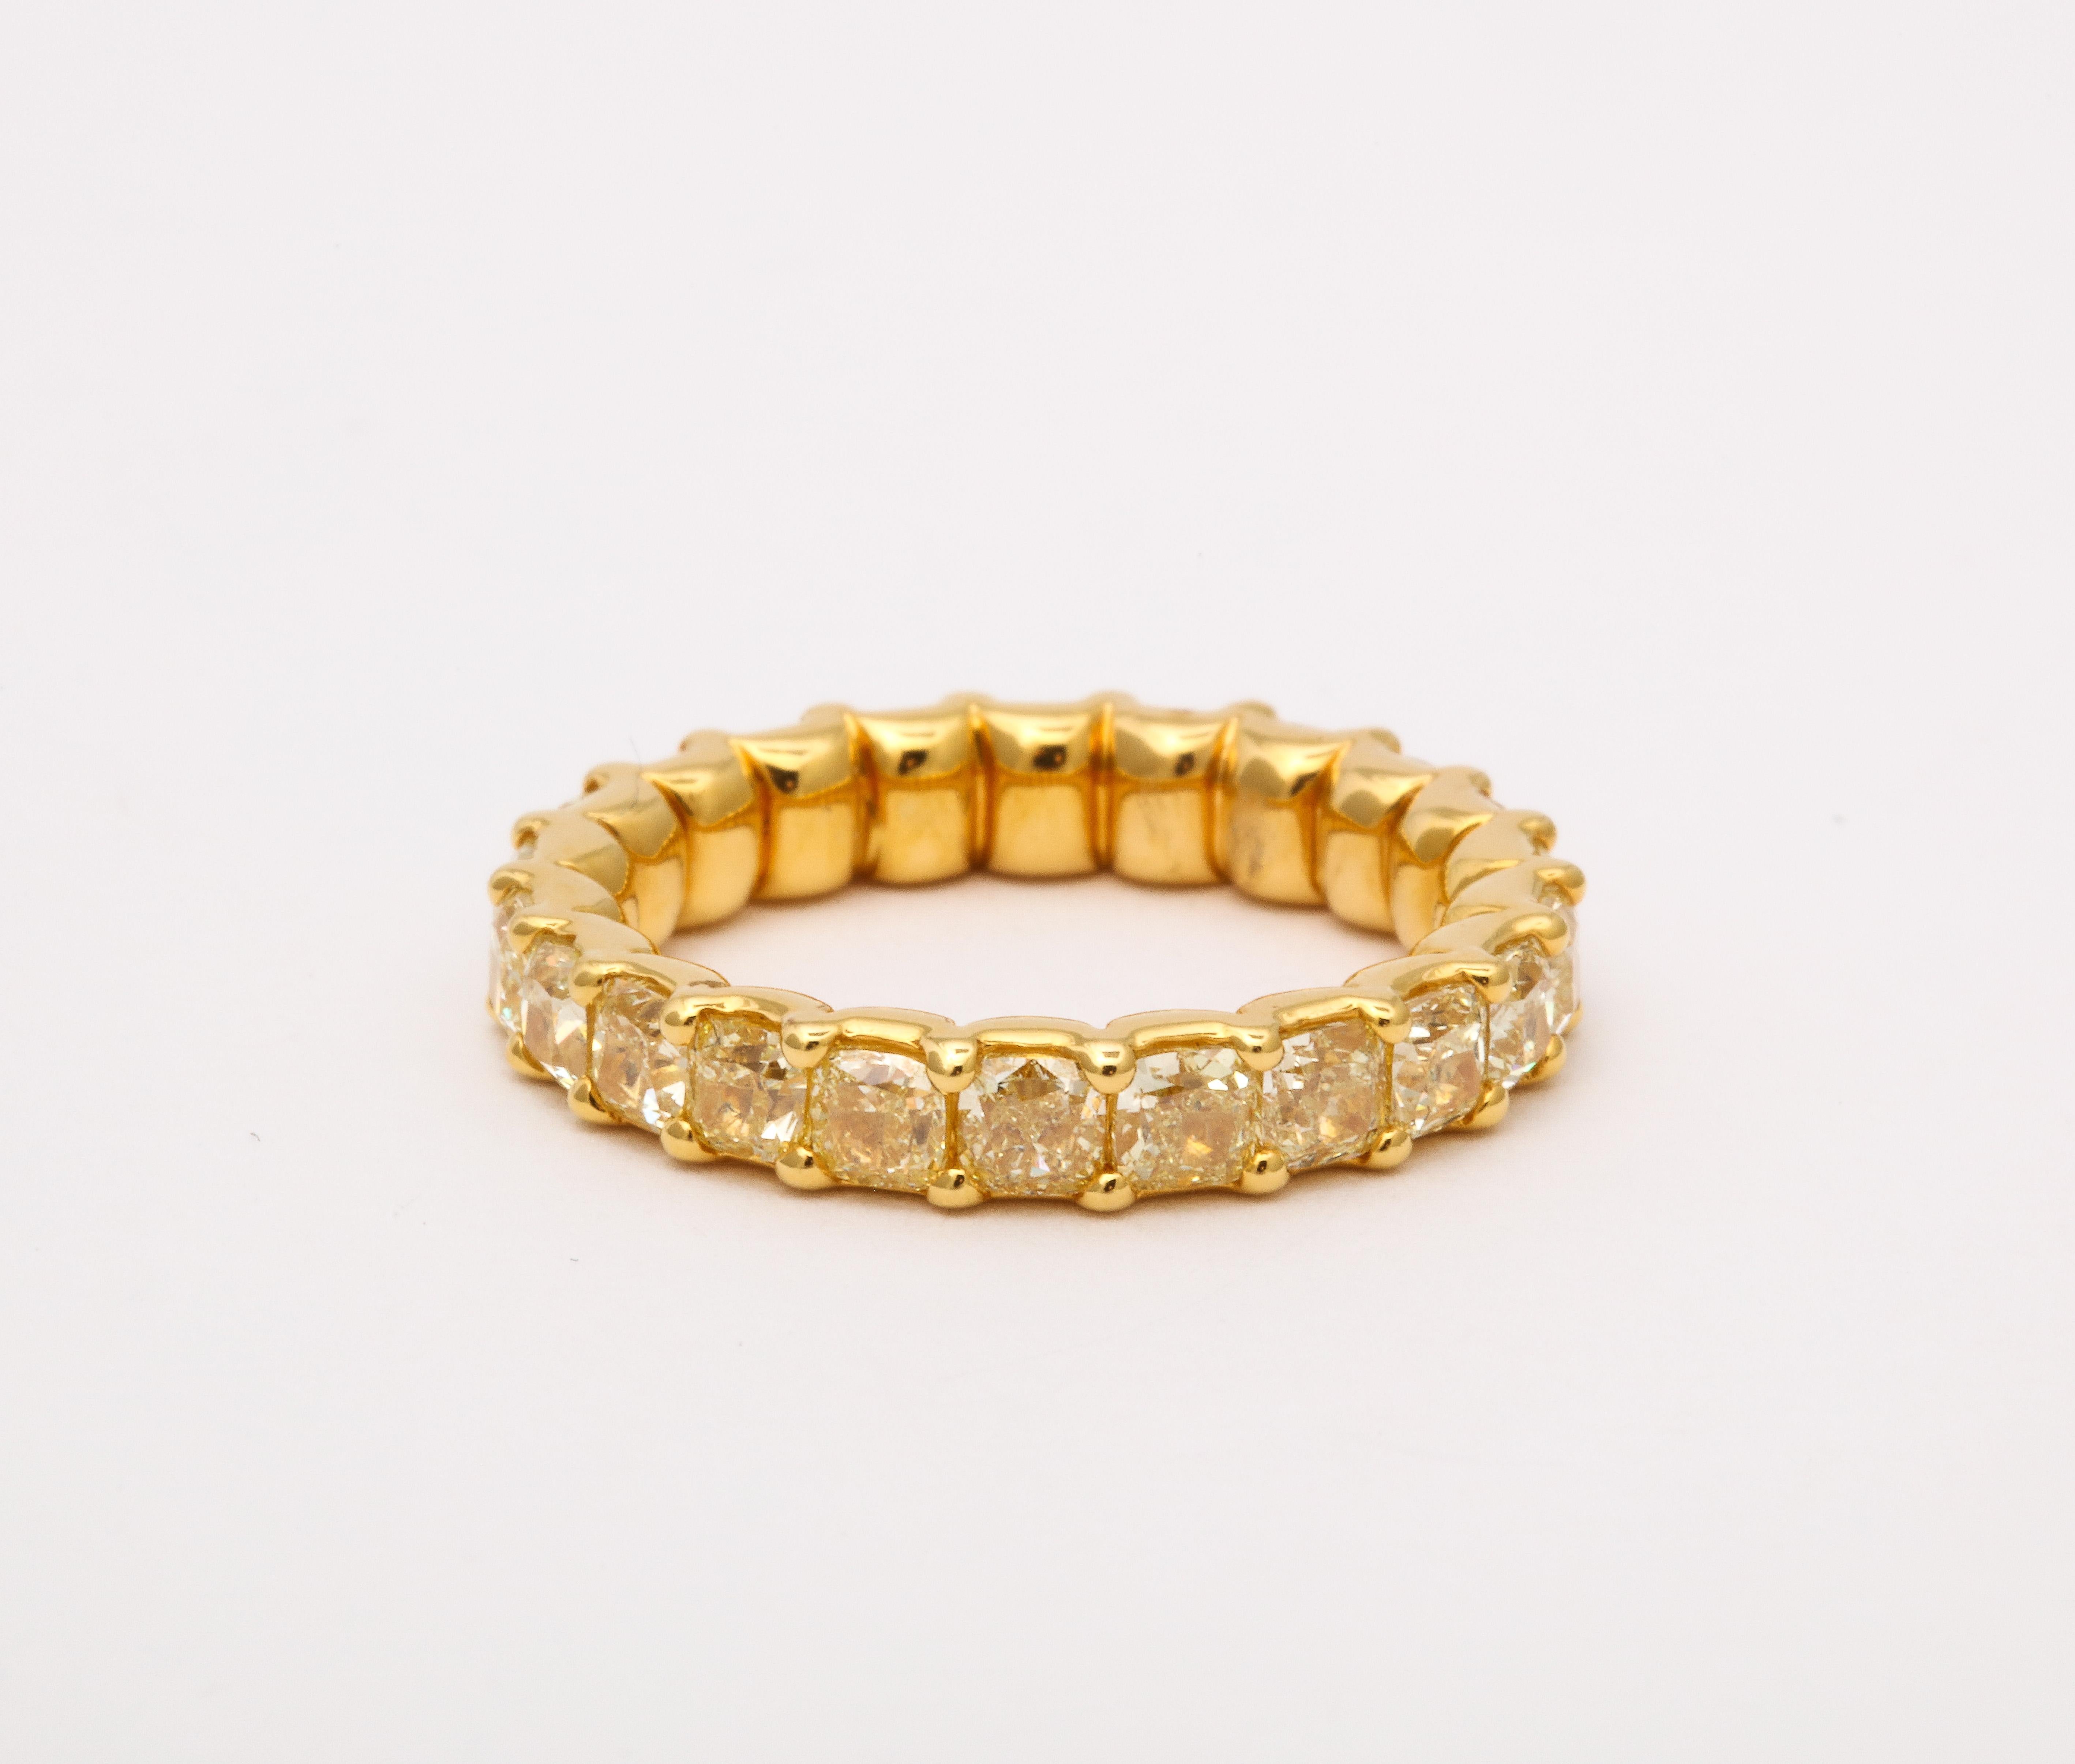 
4.18 carats of Fancy Yellow Radiant cut Yellow diamonds sent in 18k yellow gold. 

Currently a size 6.75. There is a bar for sizing - this ring can easily be sized. 

Fabulous worn alone or stacked with other bands. 

3.7 mm wide. 